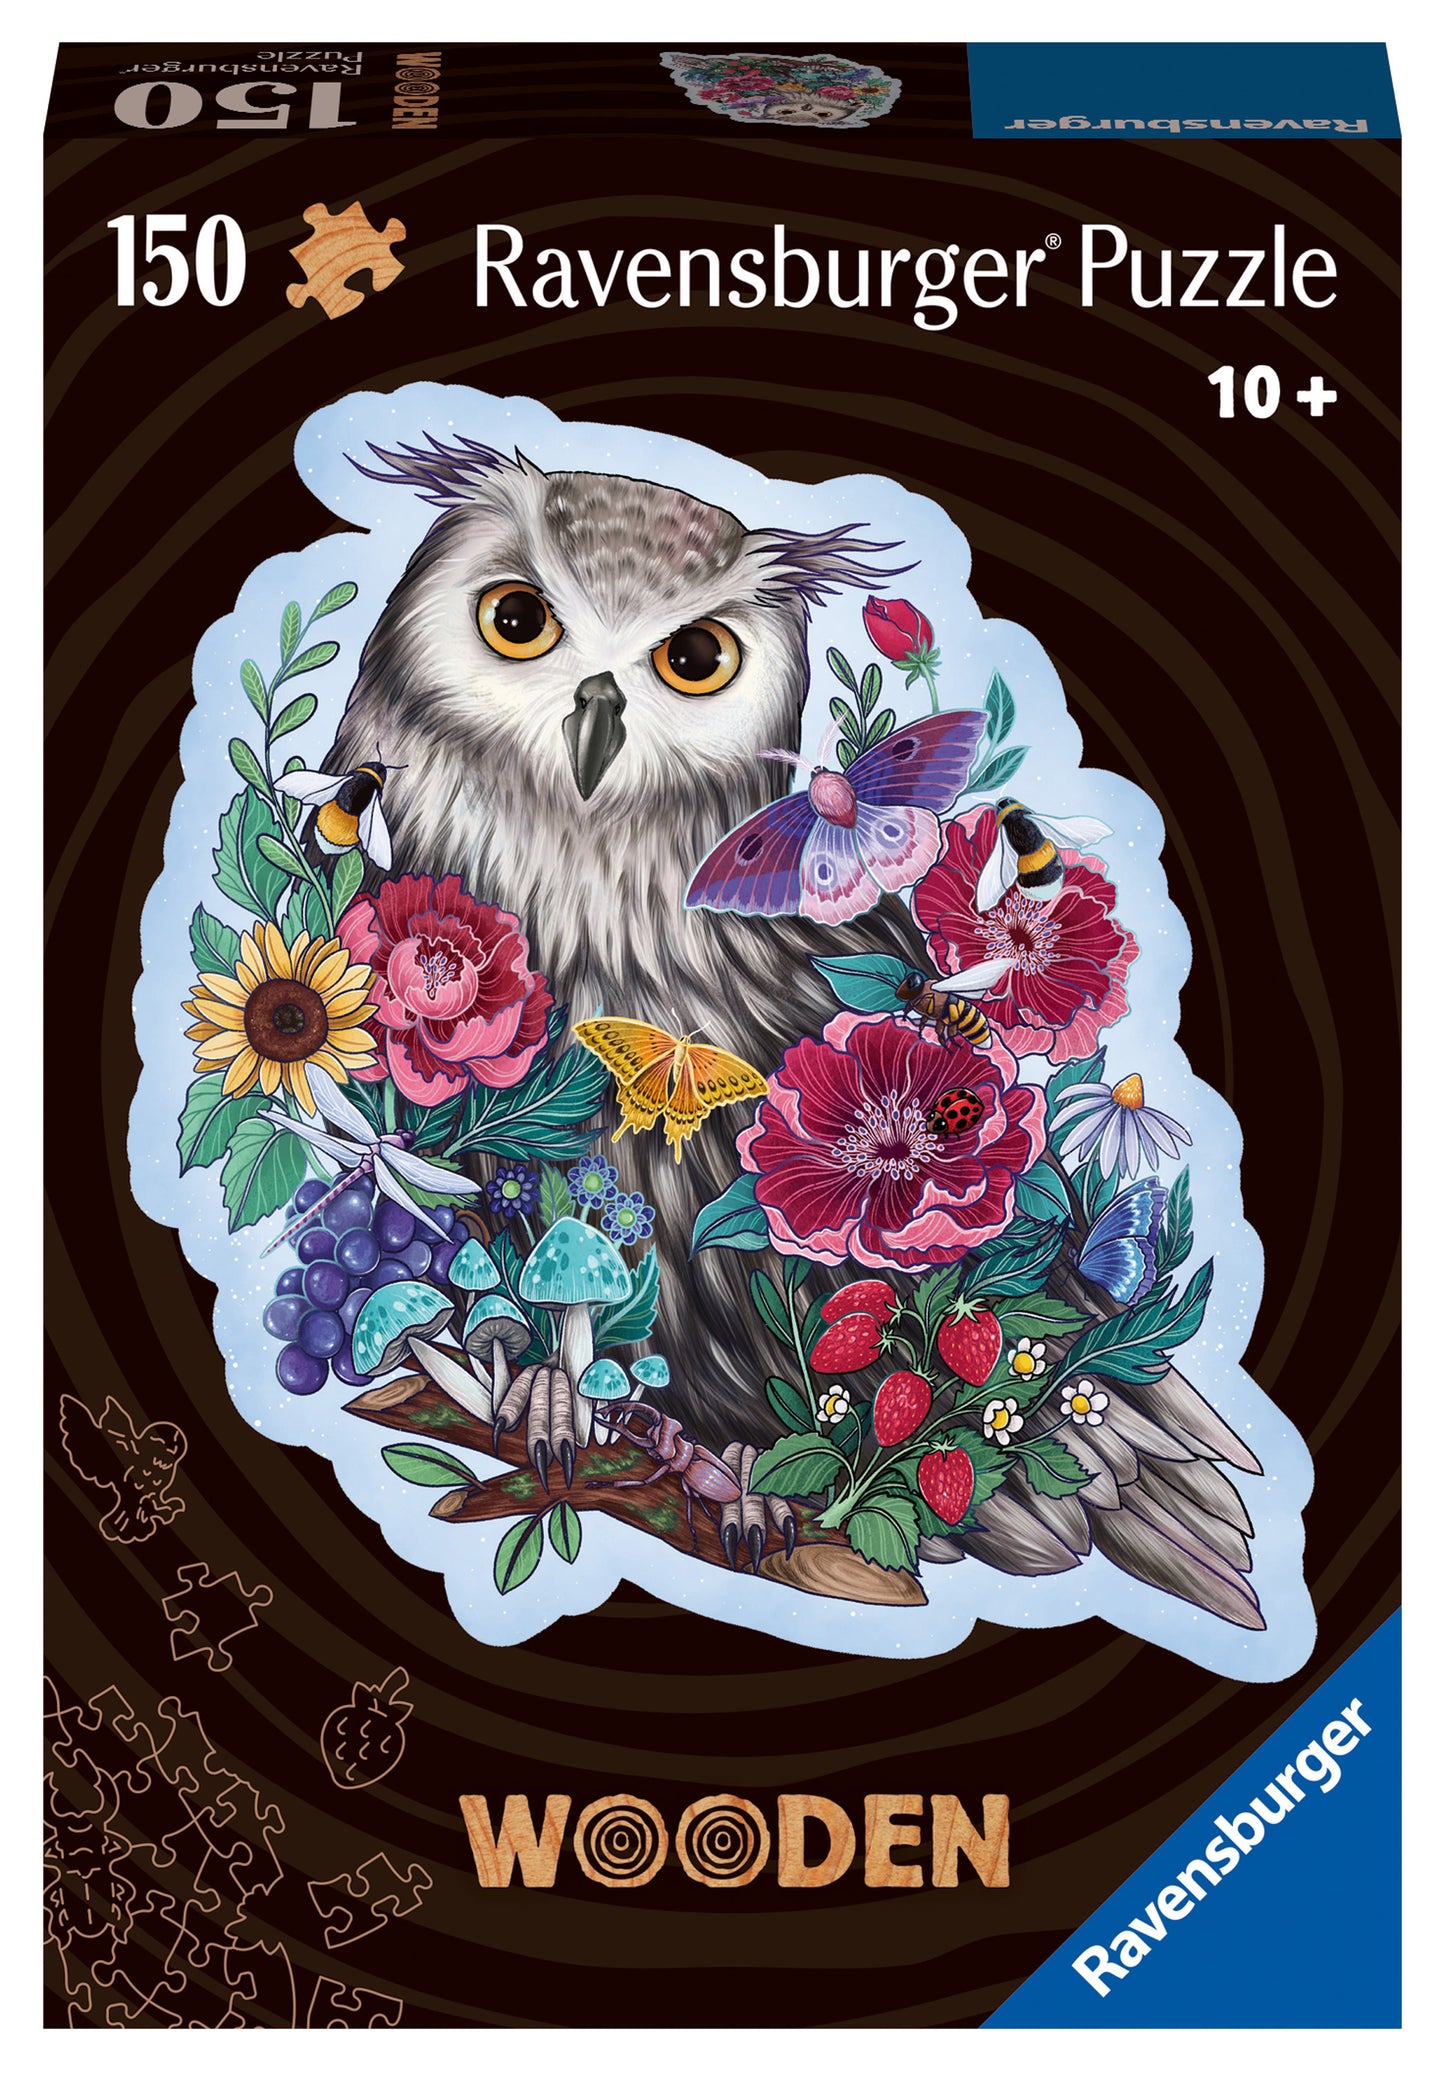 Ravensburger - Shaped Owl - 150 Piece Wooden Jigsaw Puzzle